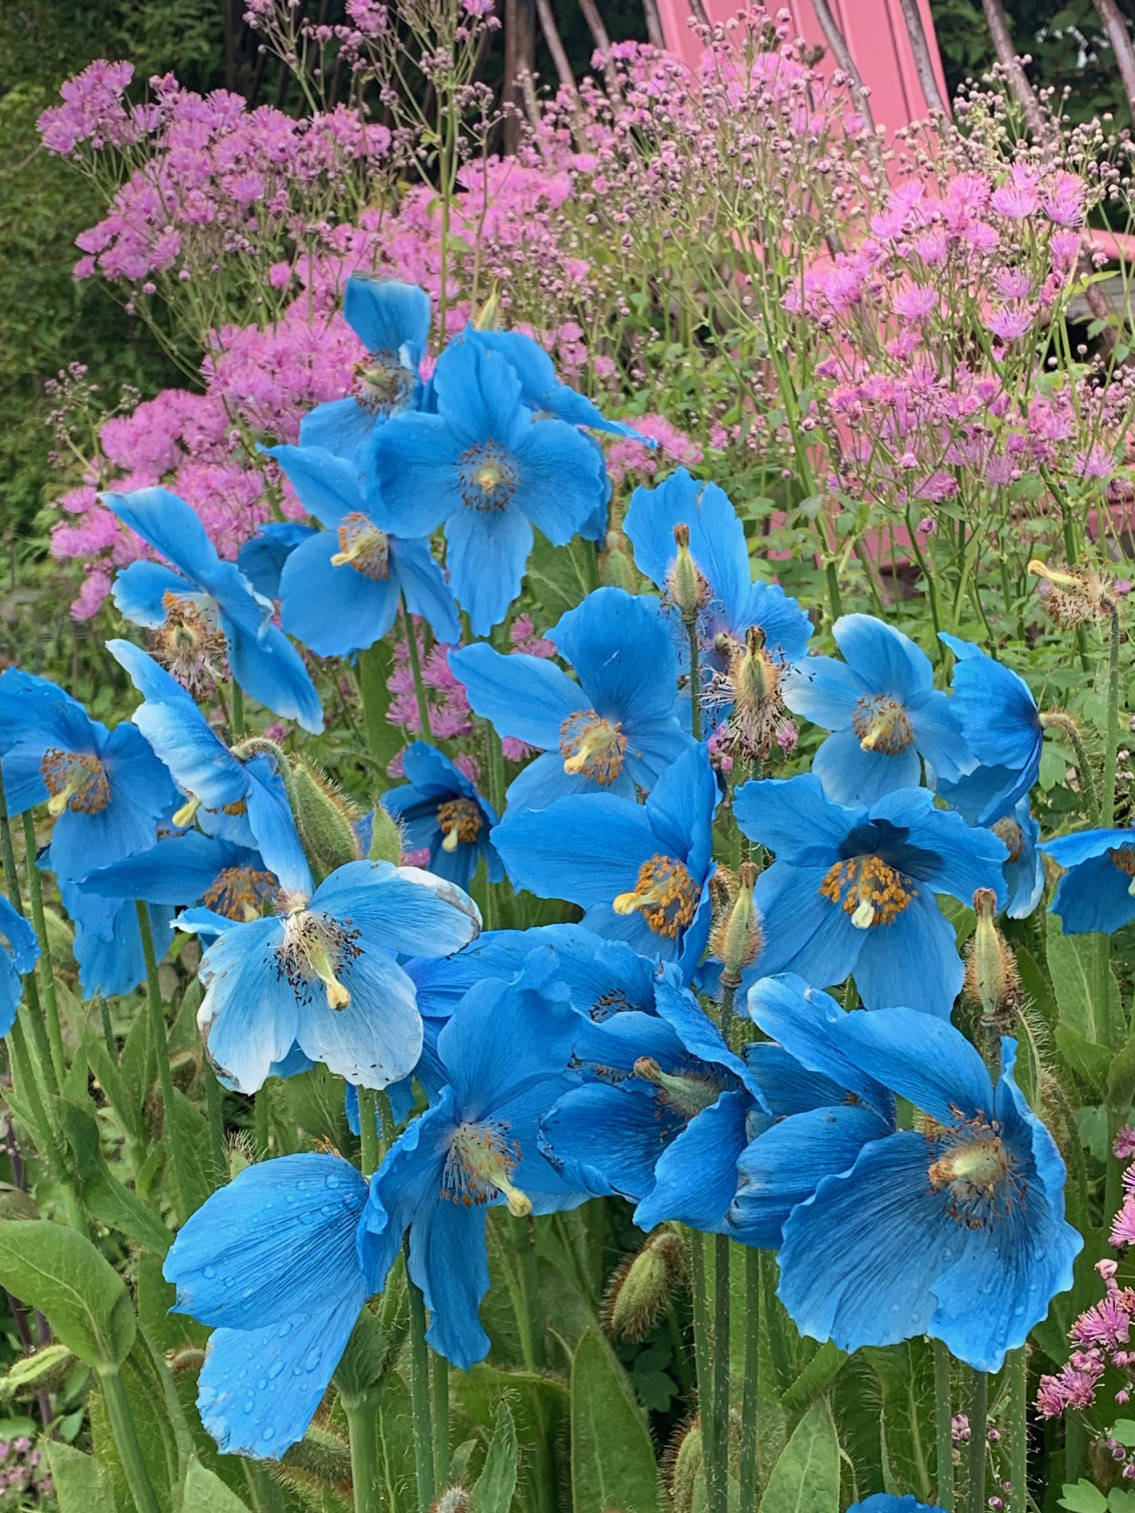 Blue poppies and pink meadow rue bloom in Rosemary Fitzpatrick’s garden on June 14, 2019, in Homer, Alsaka. “Who could ask for more?” she asks. (Photo by Rosemary Fitzpatrick)